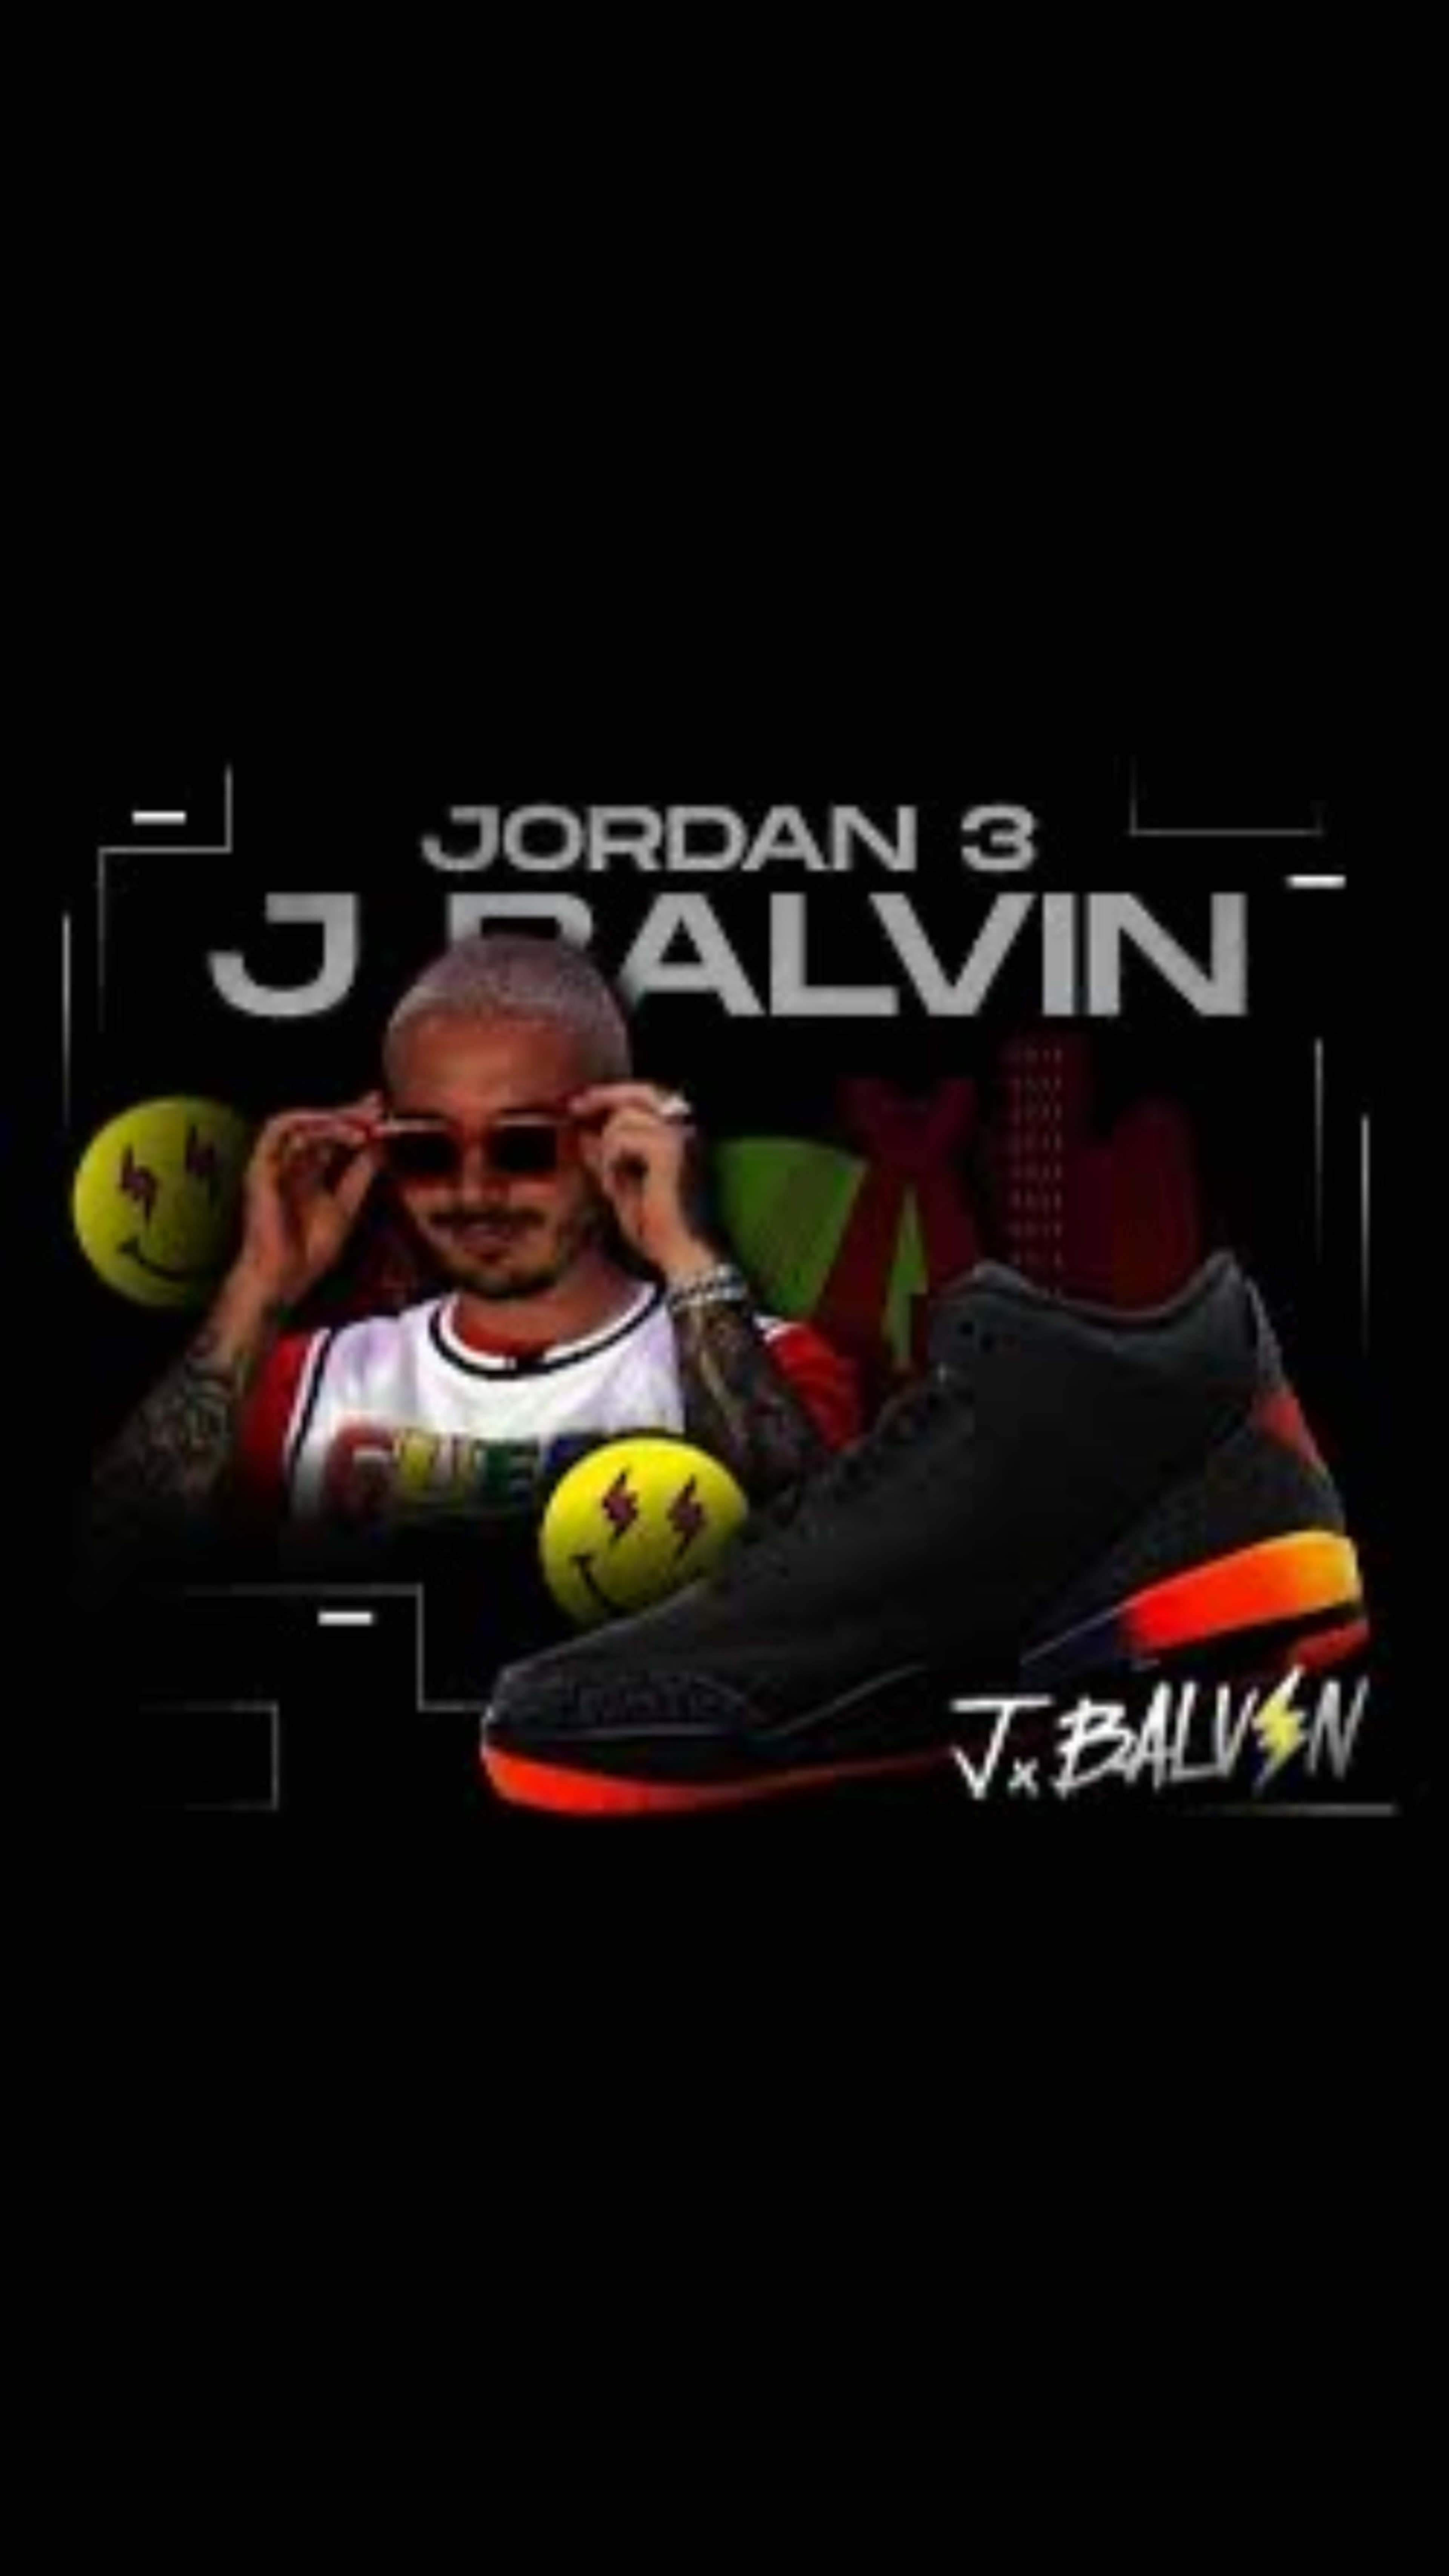 Preview image for the show titled " MYSTERY WHEEL- ANY SIZE JORDAN 3  J BALVIN RIO & INSTA HITS!" at Today @ 12:10 AM